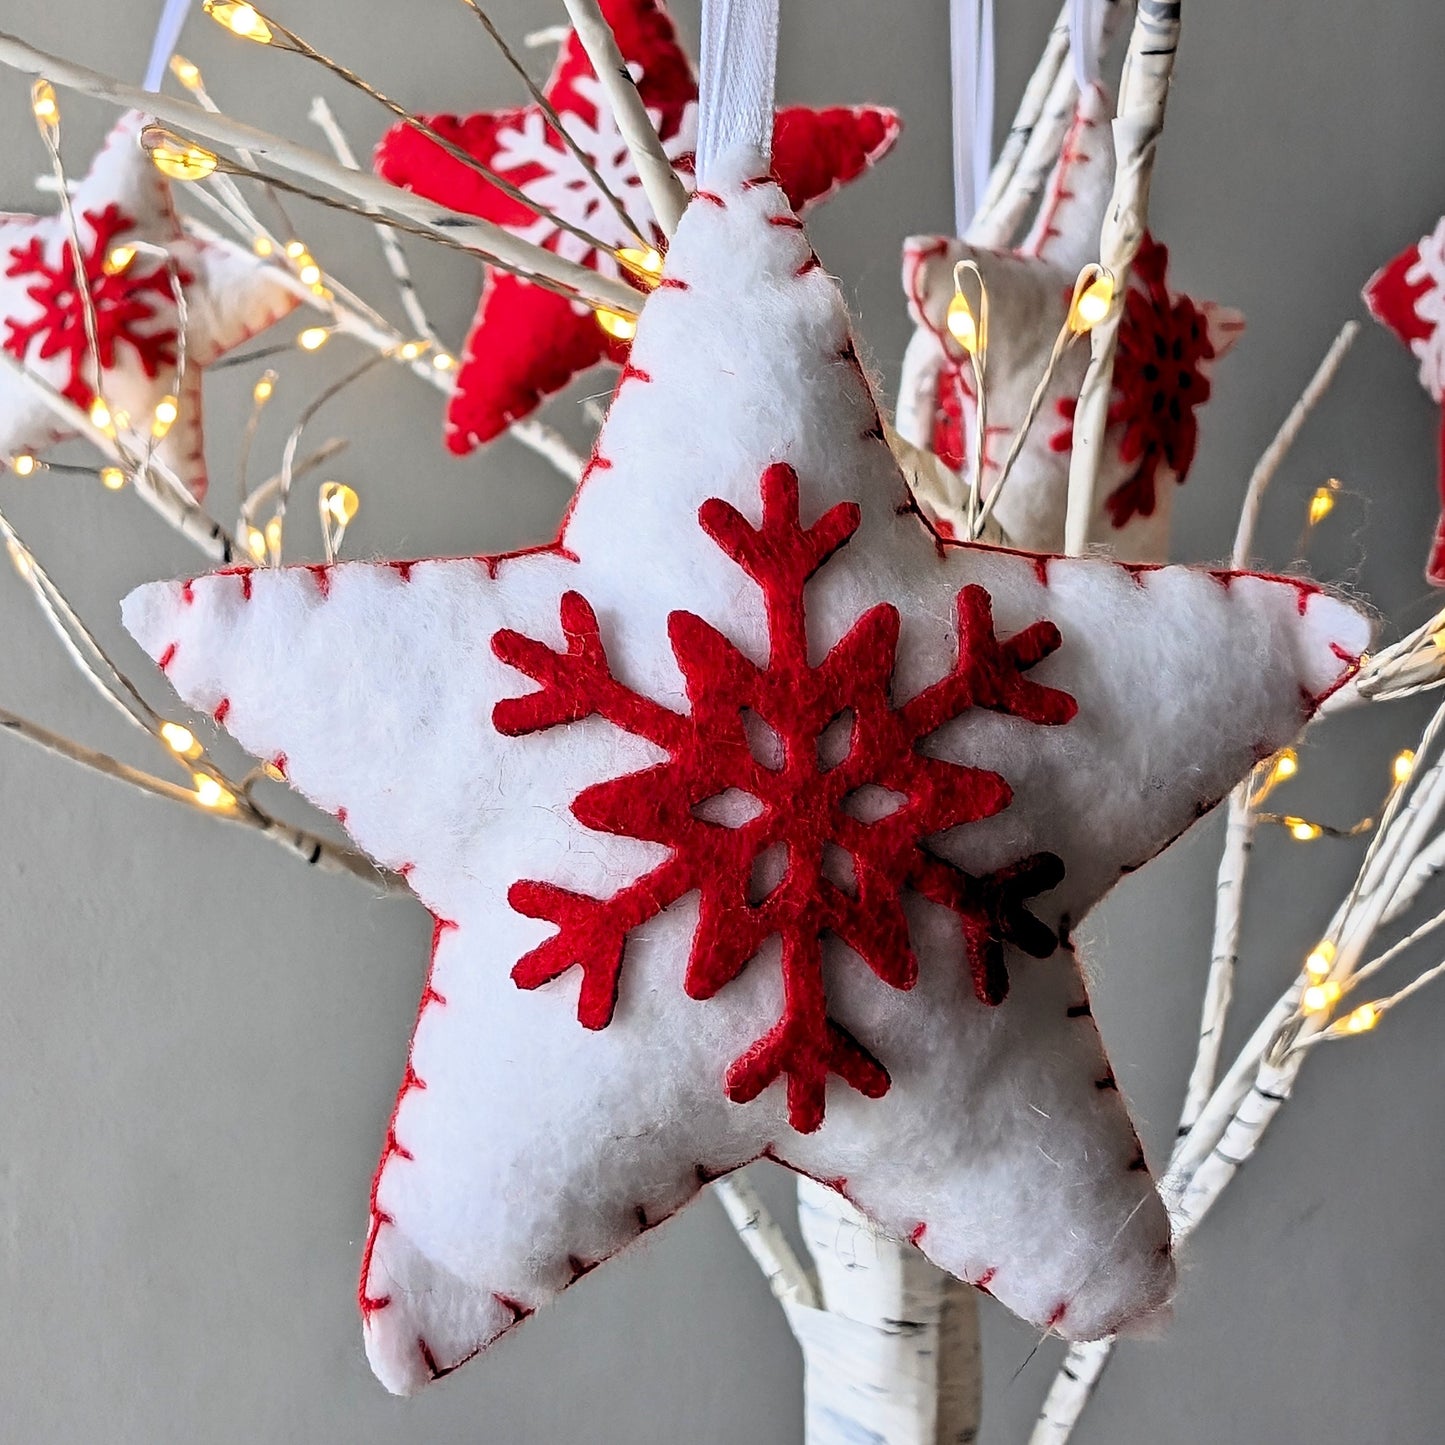 Red & White Snowflake Star Ornaments - Made of Felt - Set of 6